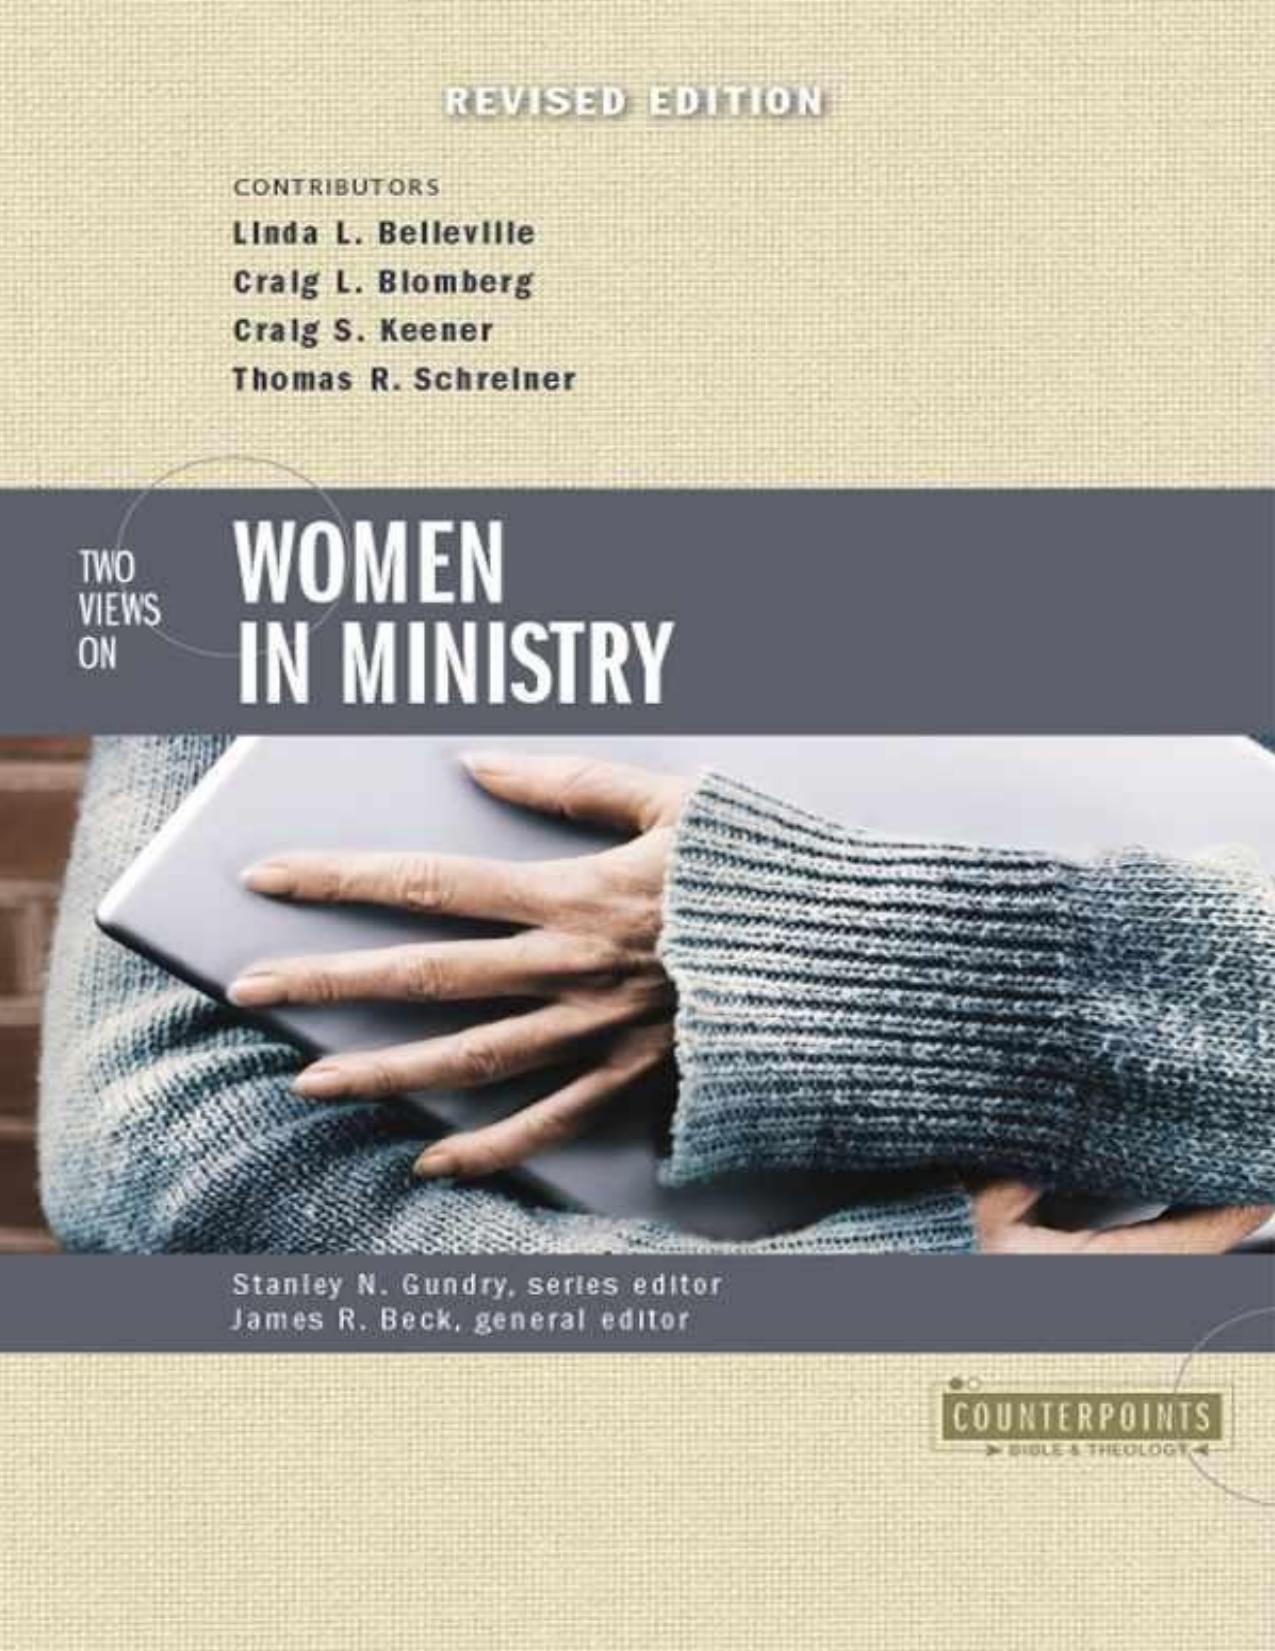 Two Views on Women in Ministry (Counterpoints: Bible and Theology) by James R. Beck